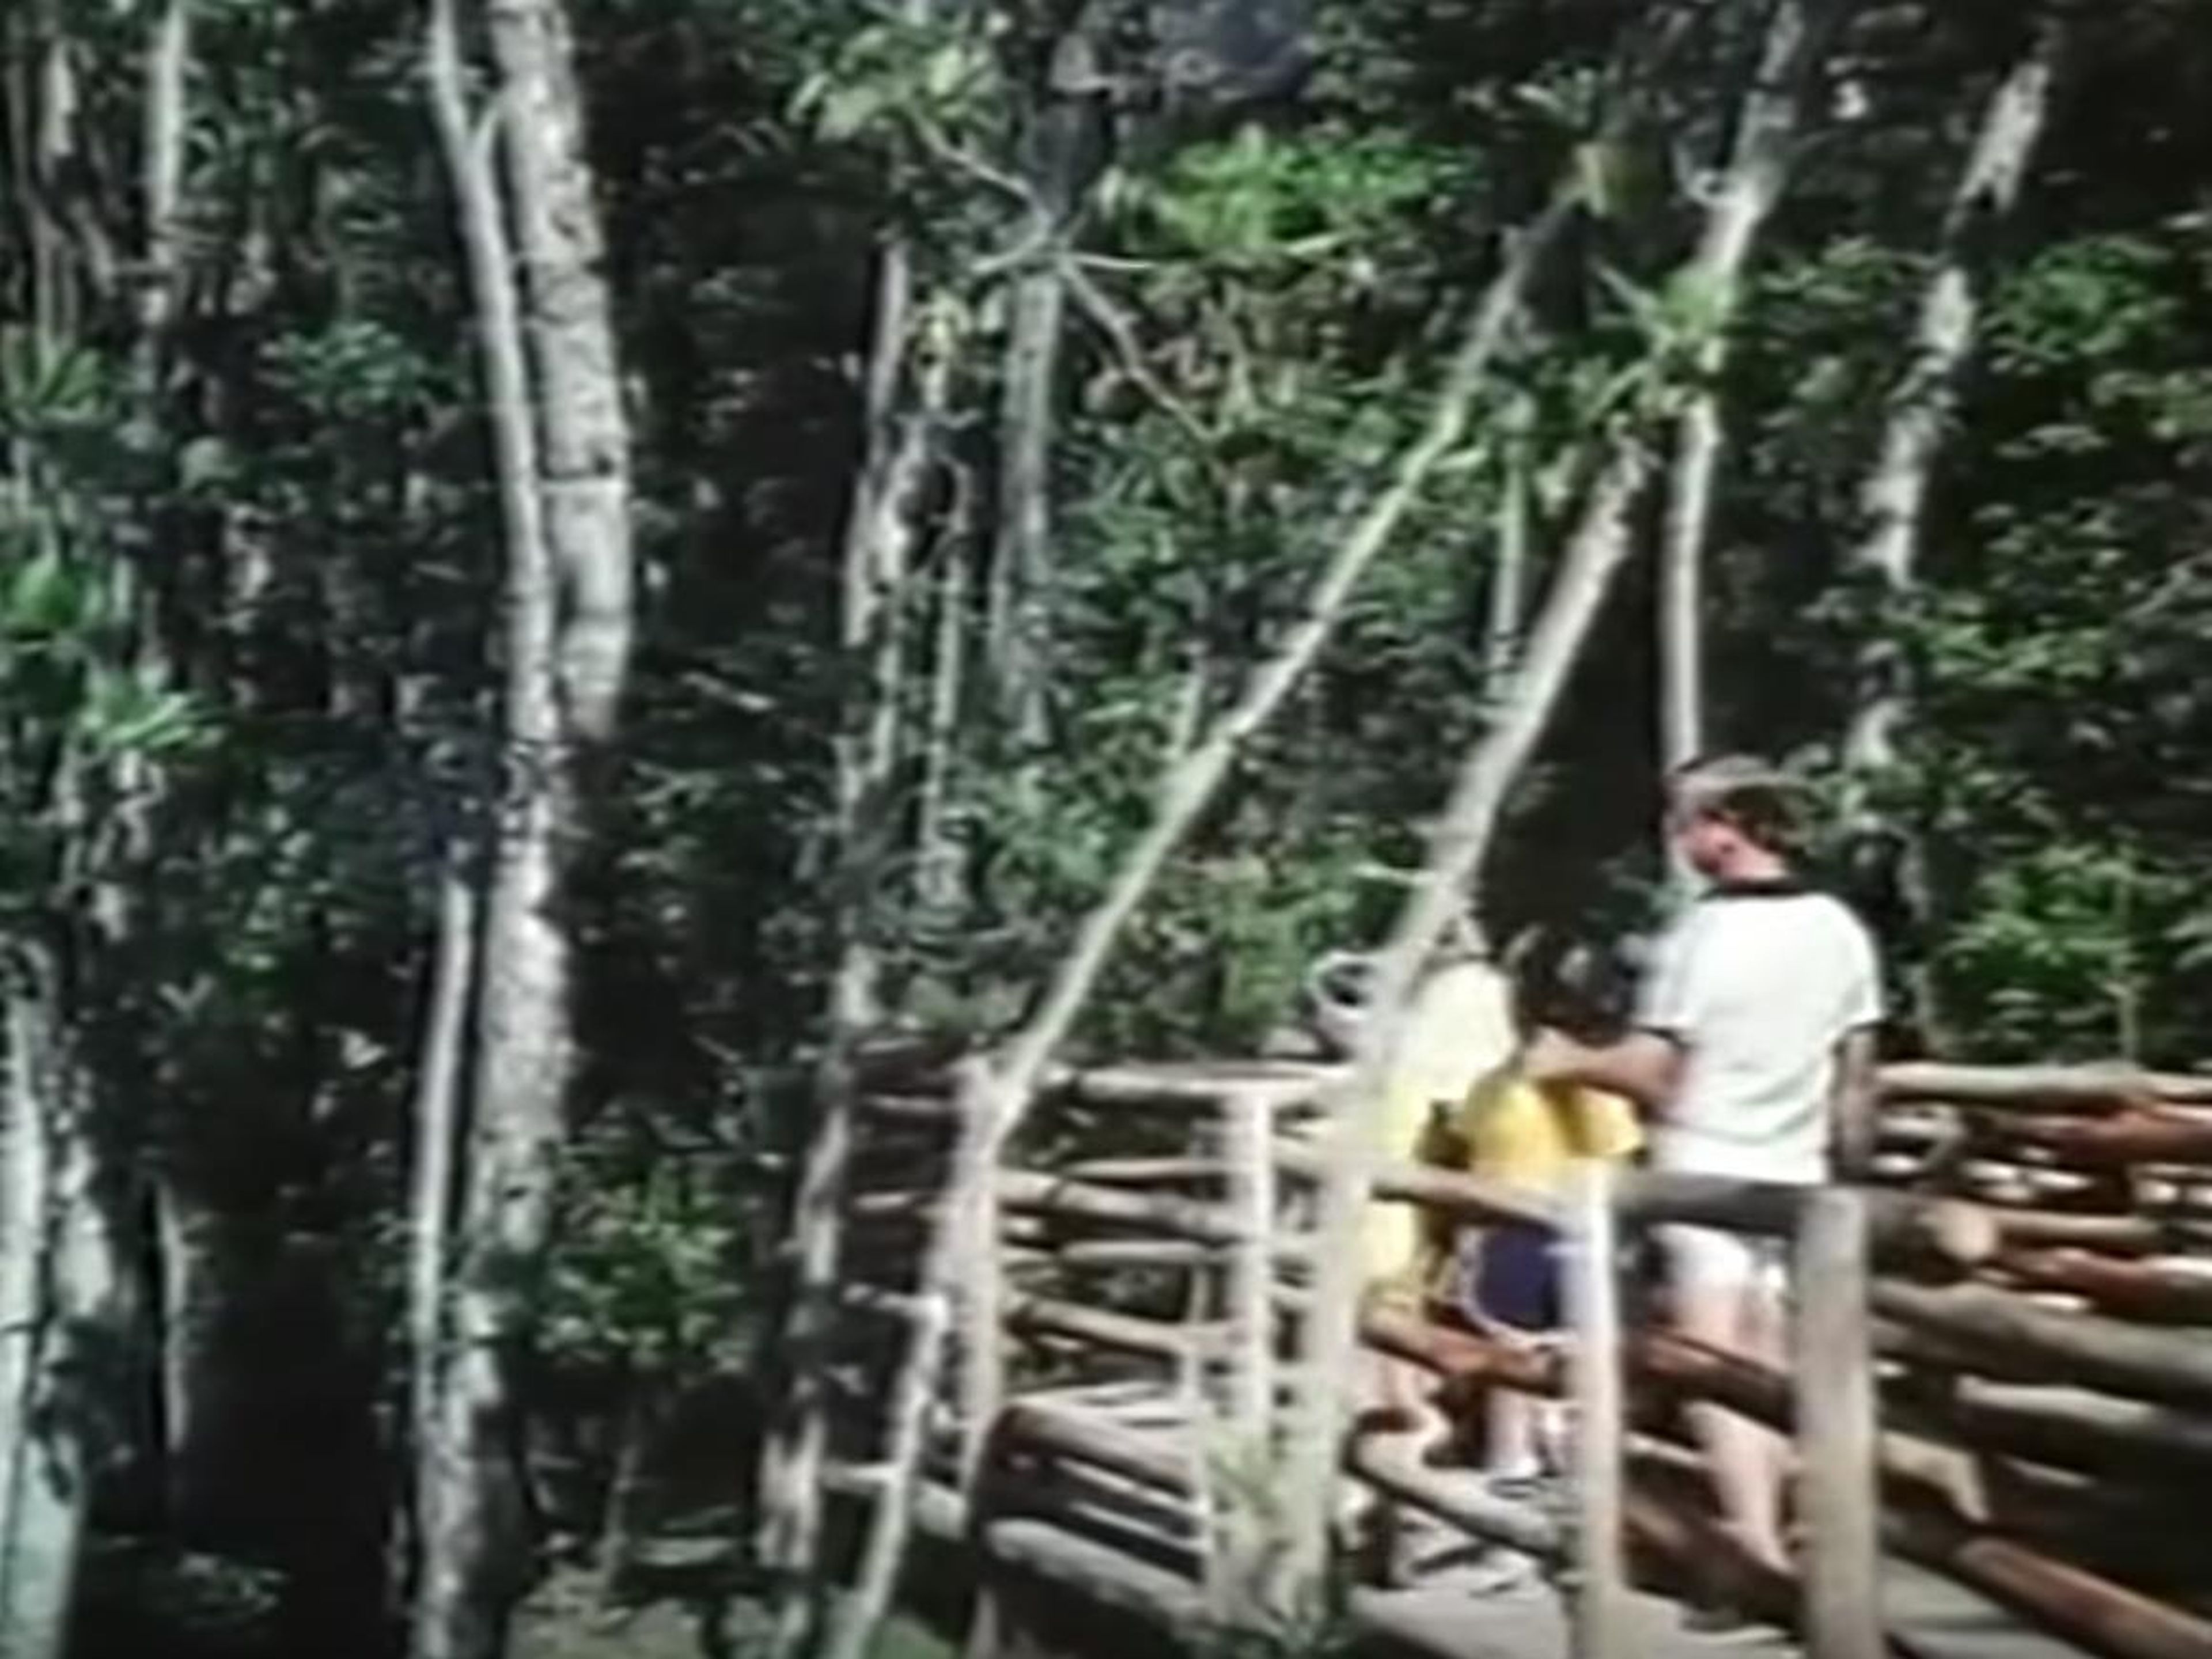 Walking through Discovery Island in its early days.